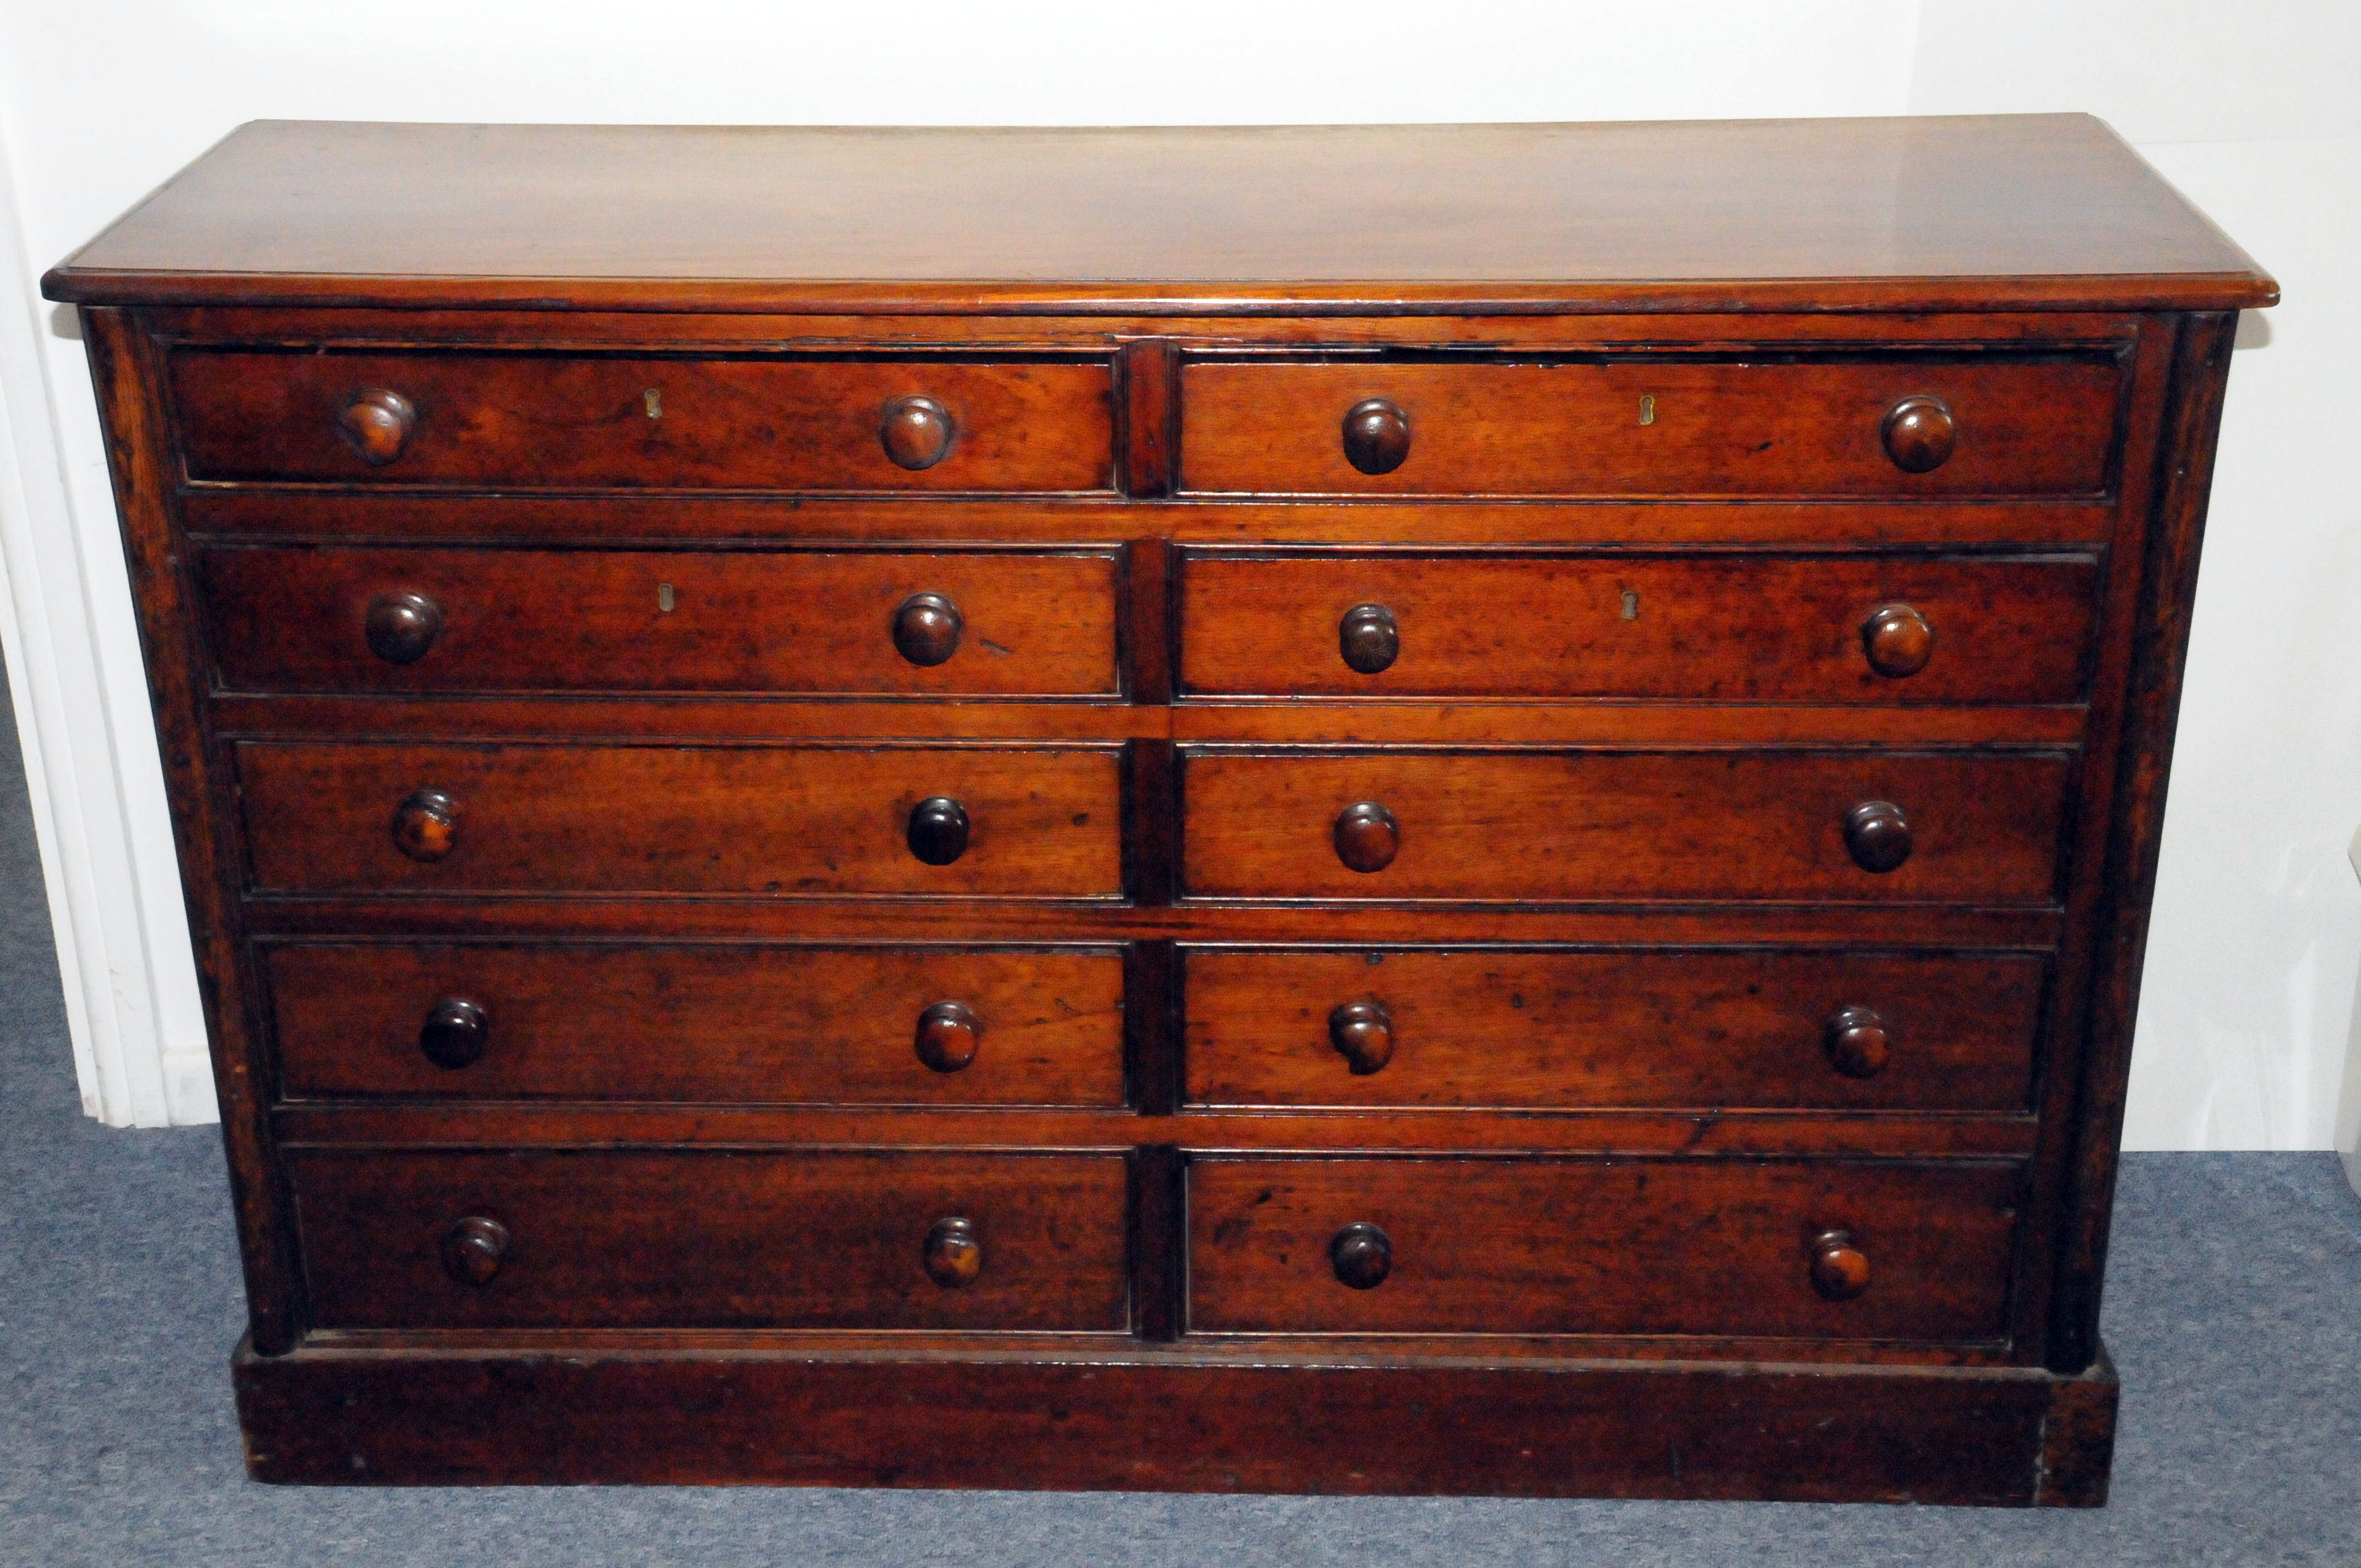 A Victorian mahogany double chest of drawers, having two sets of five graduated drawers with